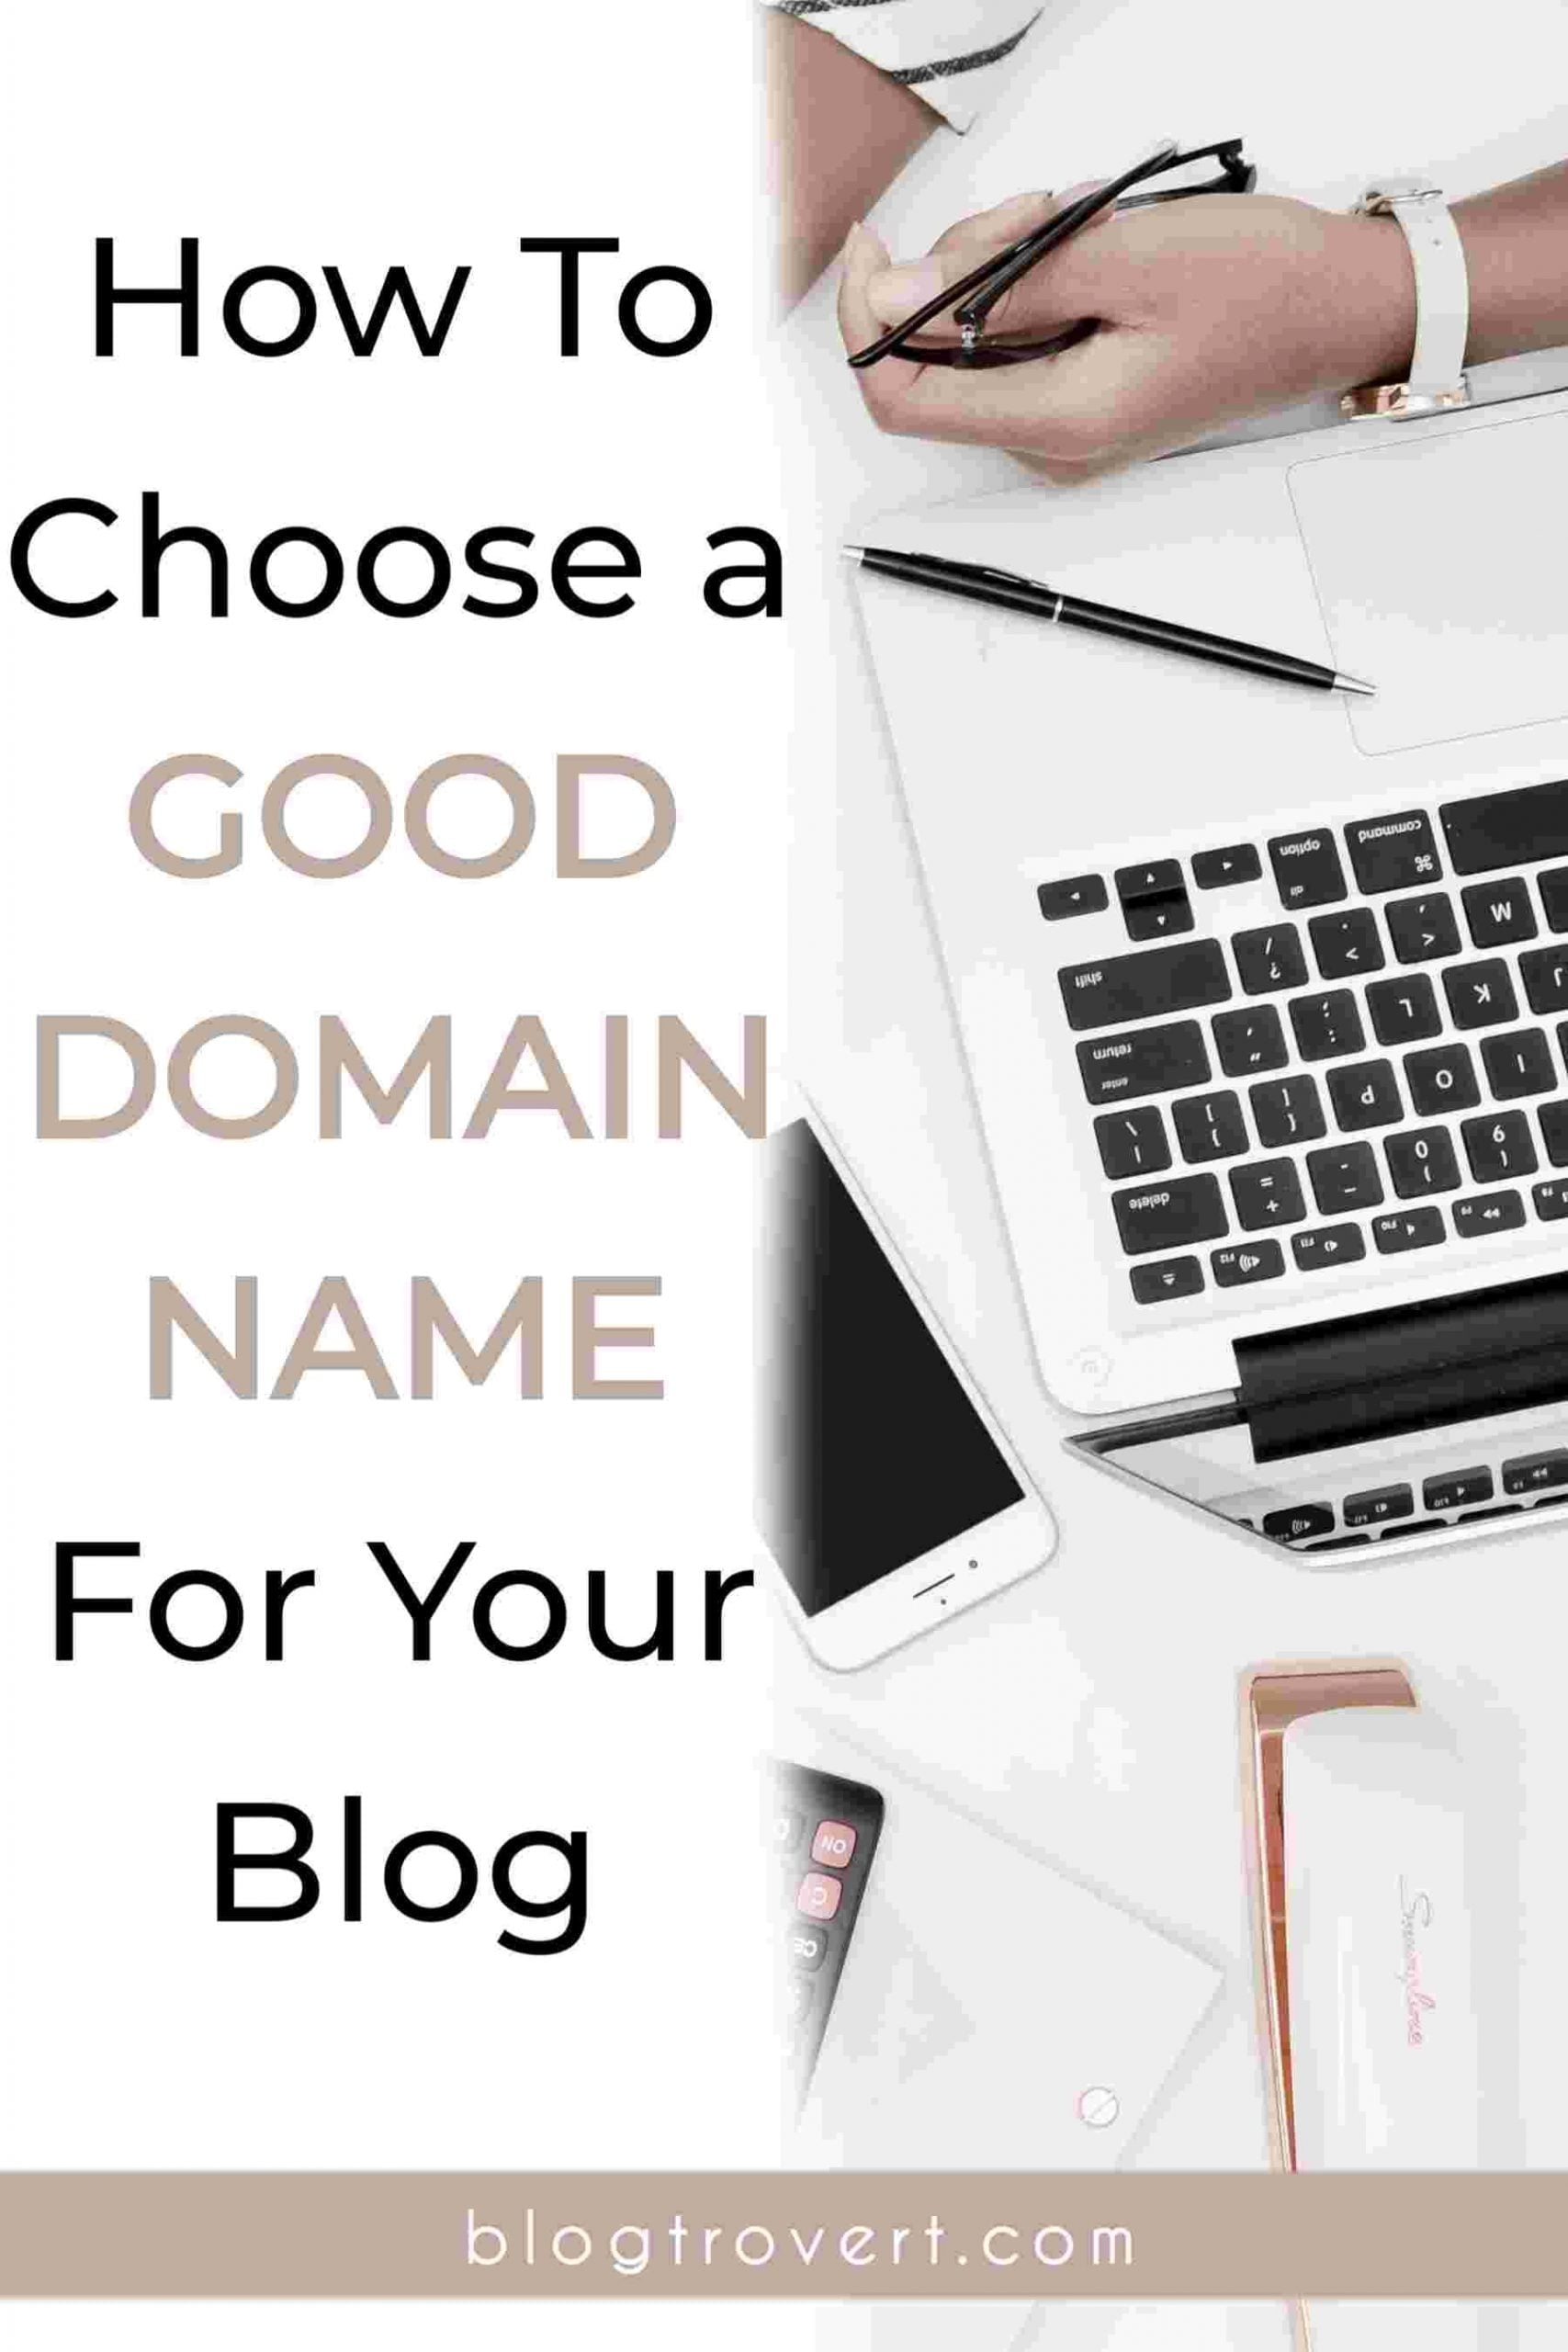 How To Choose a Good Domain Name For Your Blog; 13 Essential Tips 5